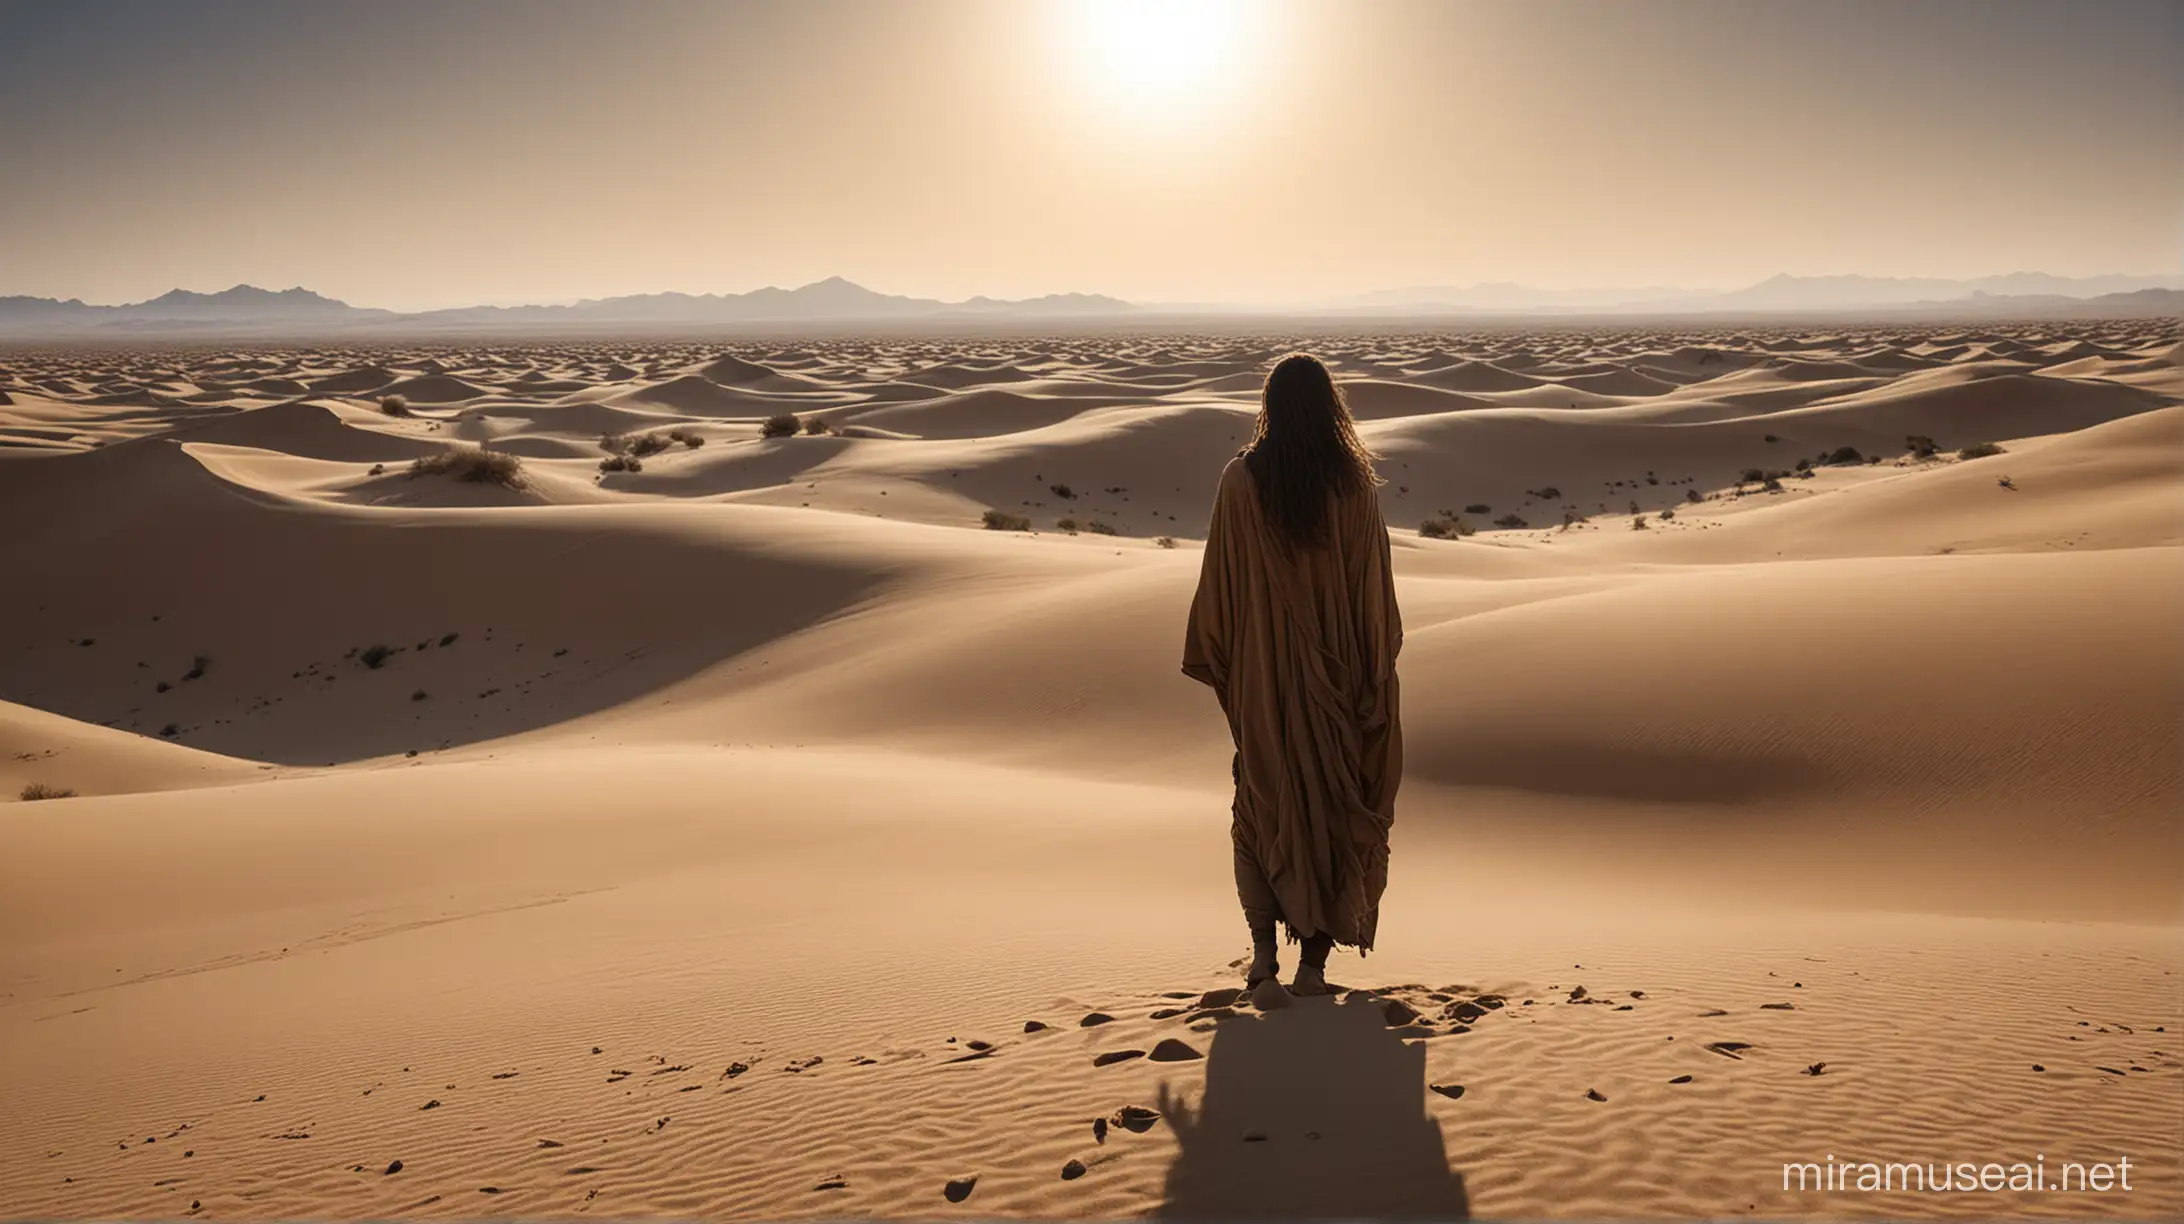 Amidst the vast expanse of the desert, where dunes stretched like frozen waves under the scorching sun, stood a solitary figure. His silhouette, outlined against the horizon, bore an air of rugged determination. Long, flowing locks of hair cascaded down his back, reminiscent of desert winds weaving through sandstone cliffs. His piercing azure eyes, framed by a thick mane of facial hair, gazed into the distance with an intensity that seemed to pierce the very fabric of time.

Cloaked in the mystique of the desert, he stood tall, a nomad of the sands, his presence commanding the attention of both the harsh landscape and the relentless elements. The sun, casting long shadows across the dunes, painted his form in hues of gold and amber, as if nature itself conspired to imbue him with the essence of the desert.

With a Nikon Z8 camera in hand, its lens capturing every minute detail with unparalleled precision, the scene unfolded in exquisite clarity. The desert, with its shifting sands and ancient secrets, sprawled before him like an endless canvas waiting to be explored. And beyond, on the distant horizon, a swirling tempest of sand and wind heralded the approach of a desert storm, a testament to the unforgiving nature of this barren land.